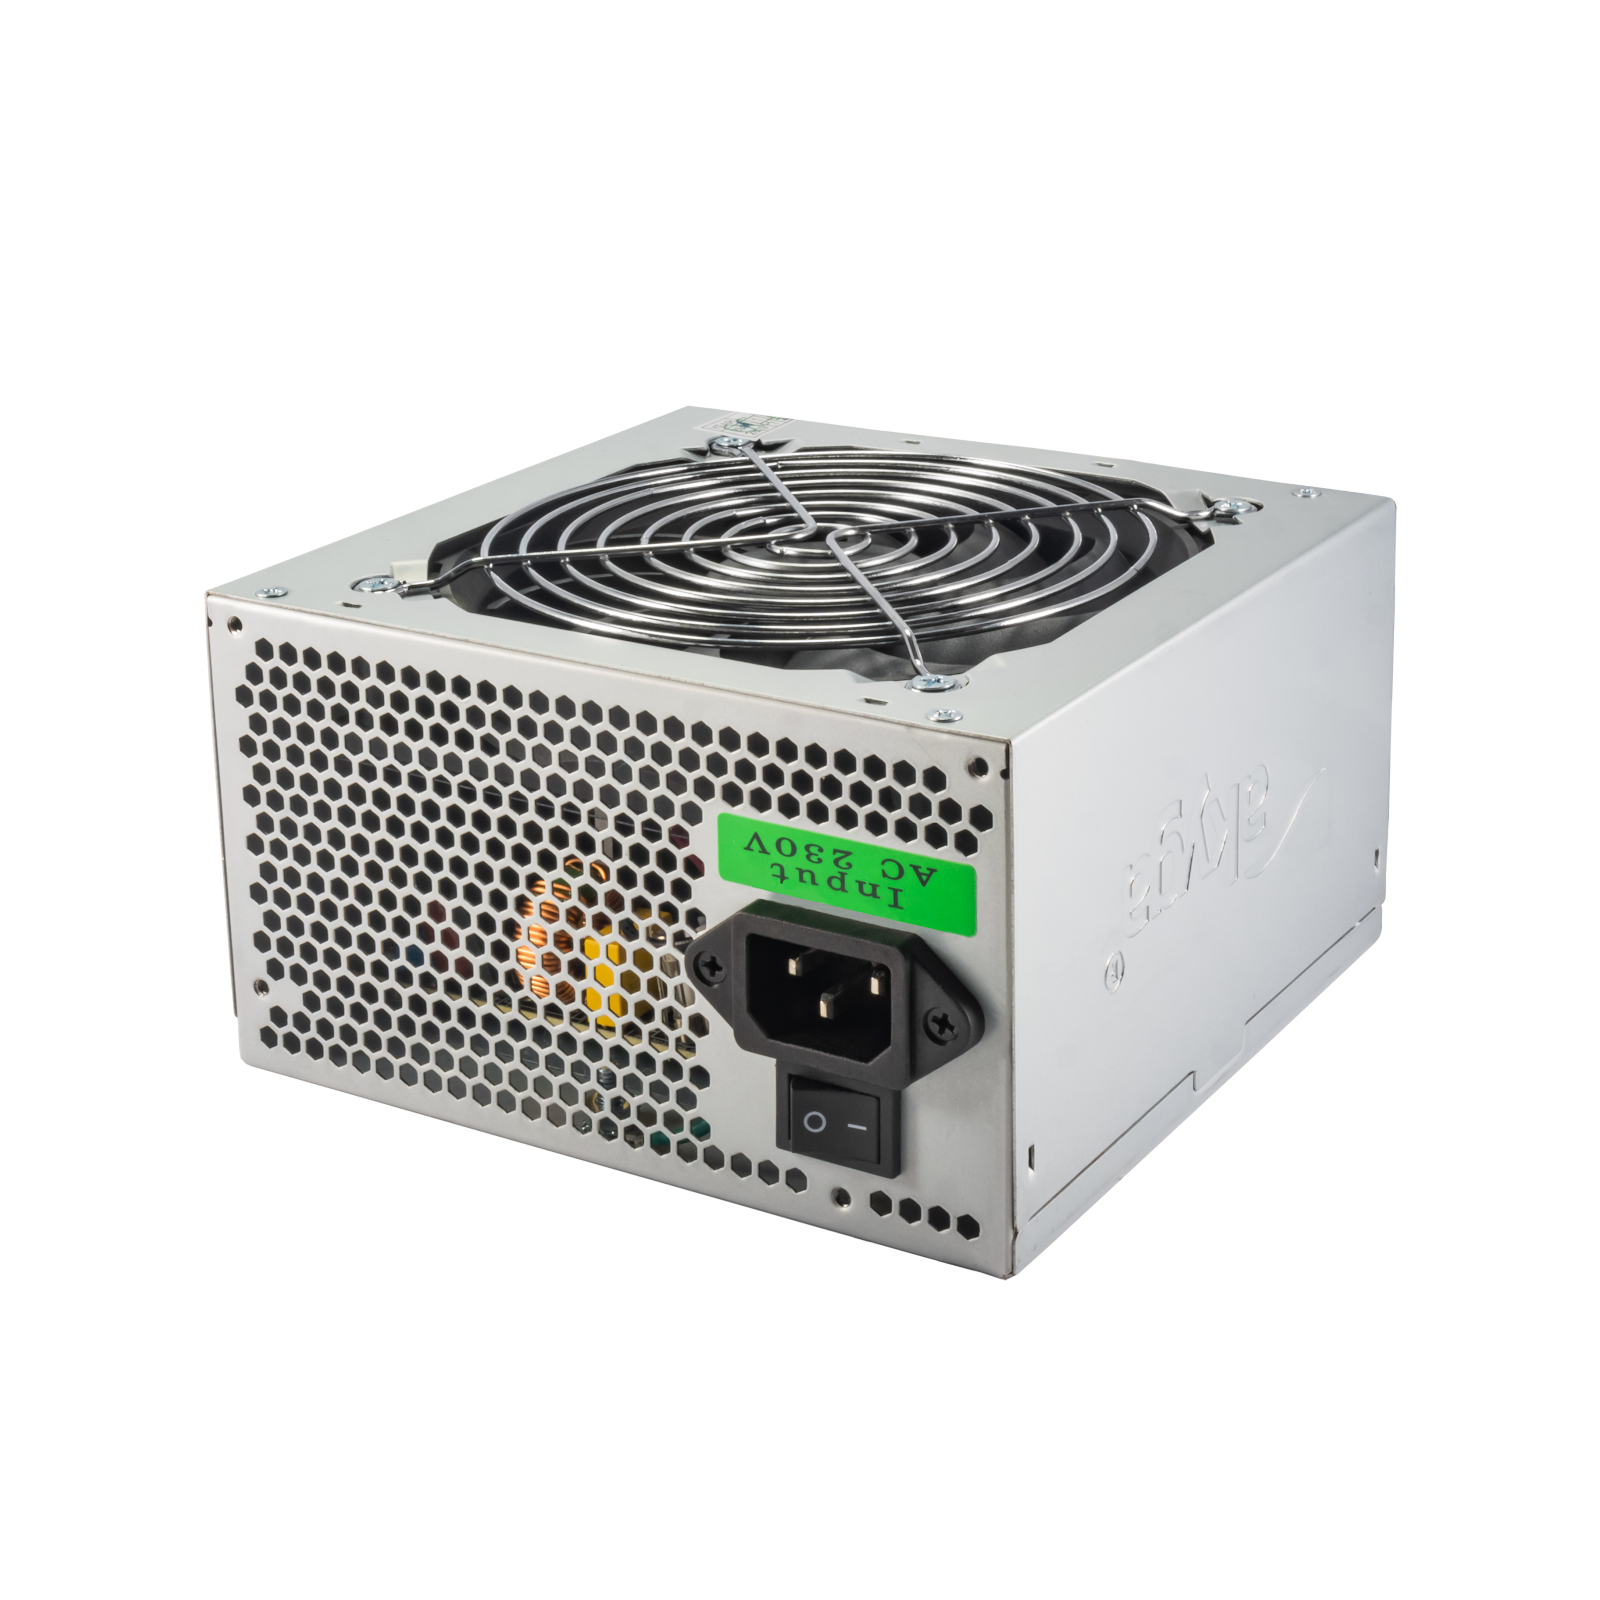 What is an ATX PSU